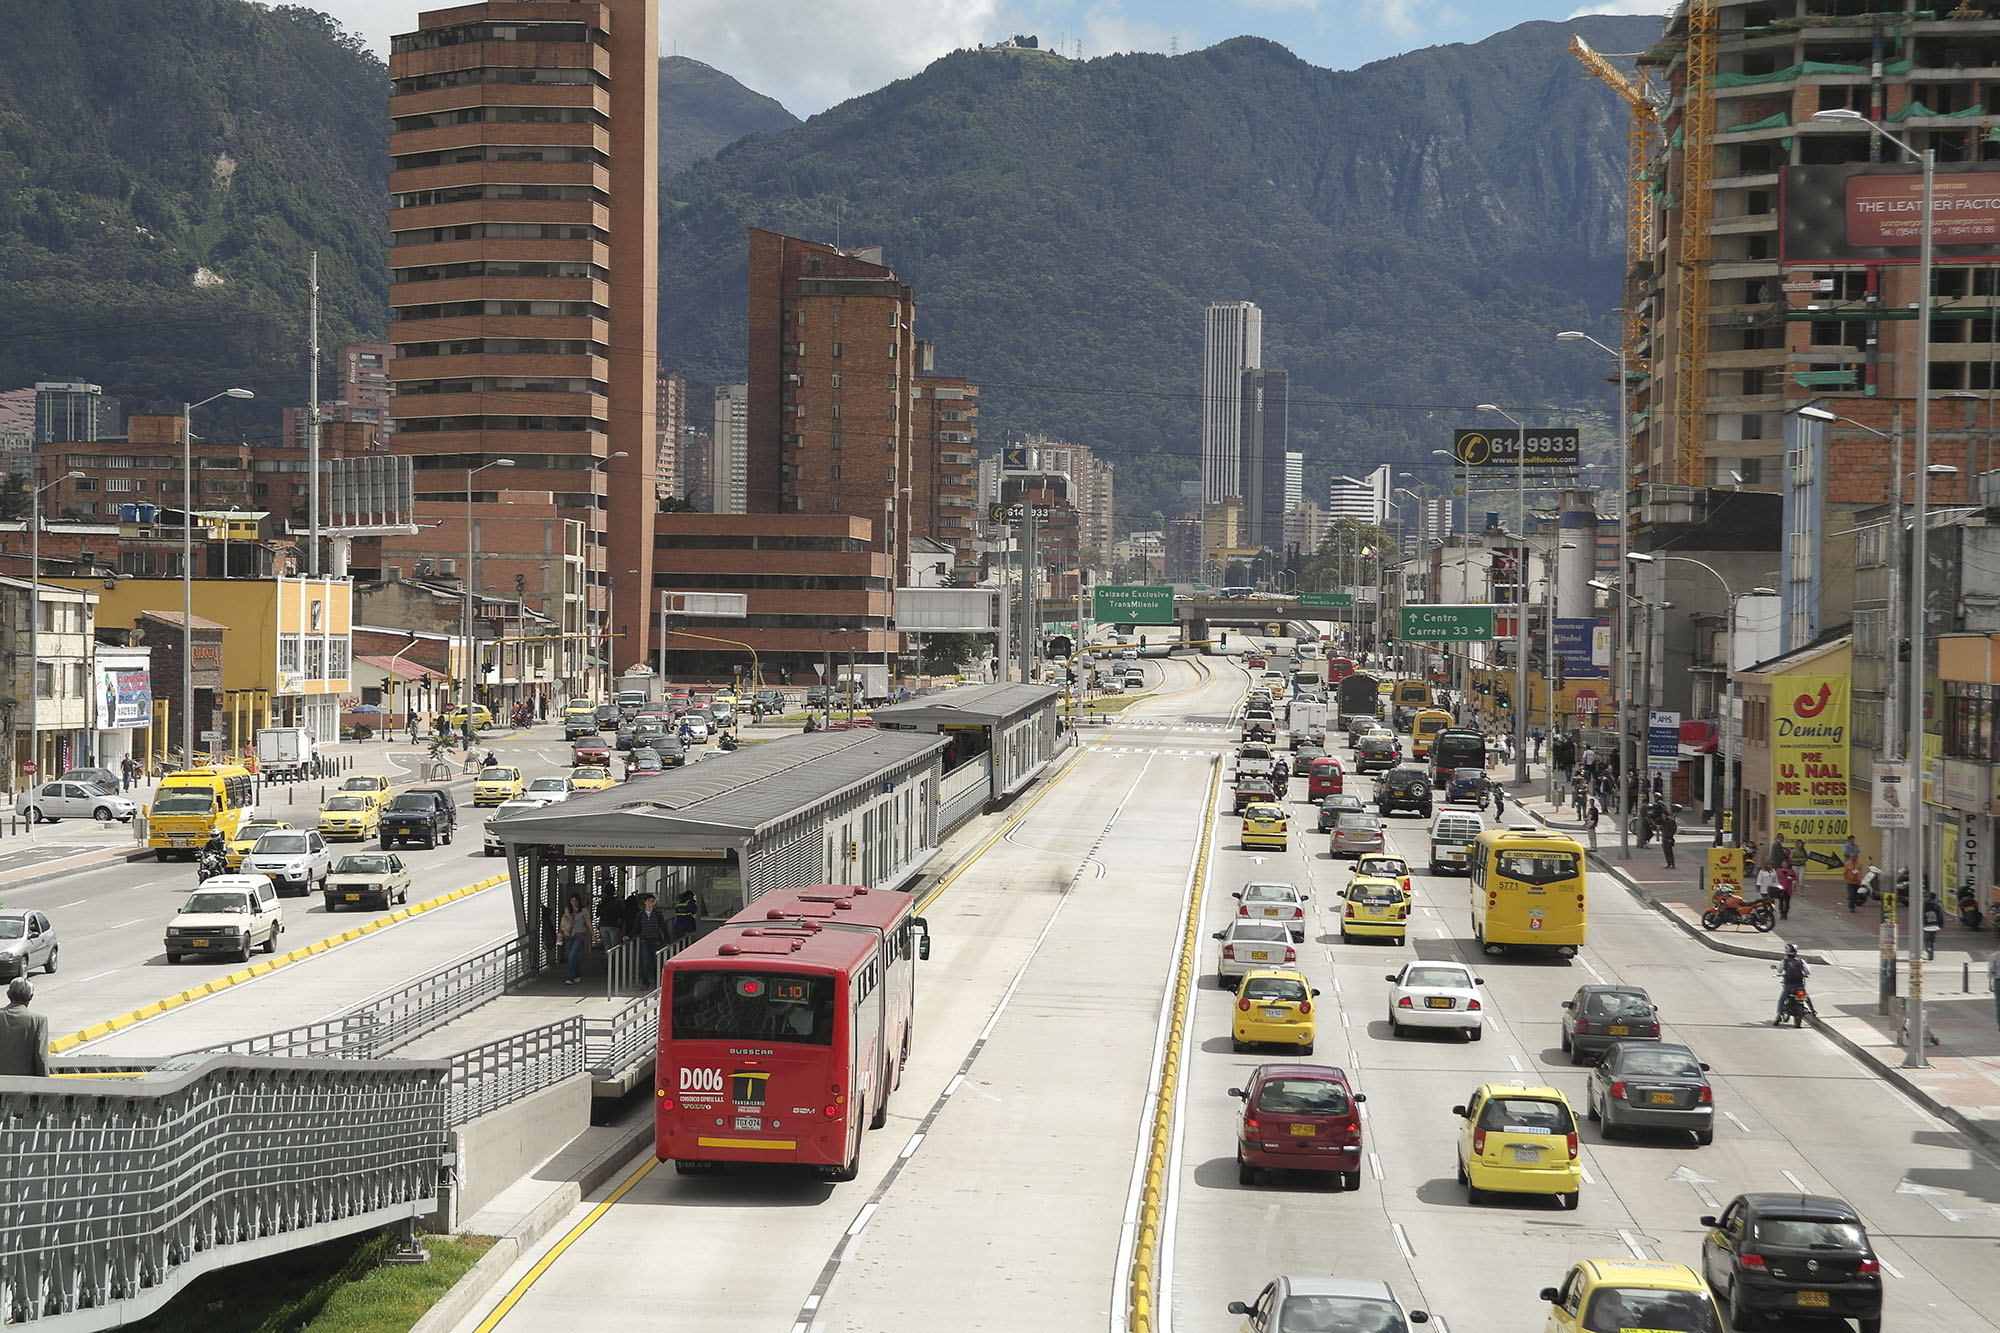 Fig. 22.19 A median busway in Bogotá with a single median station has become the standard for high-quality BRT systems.